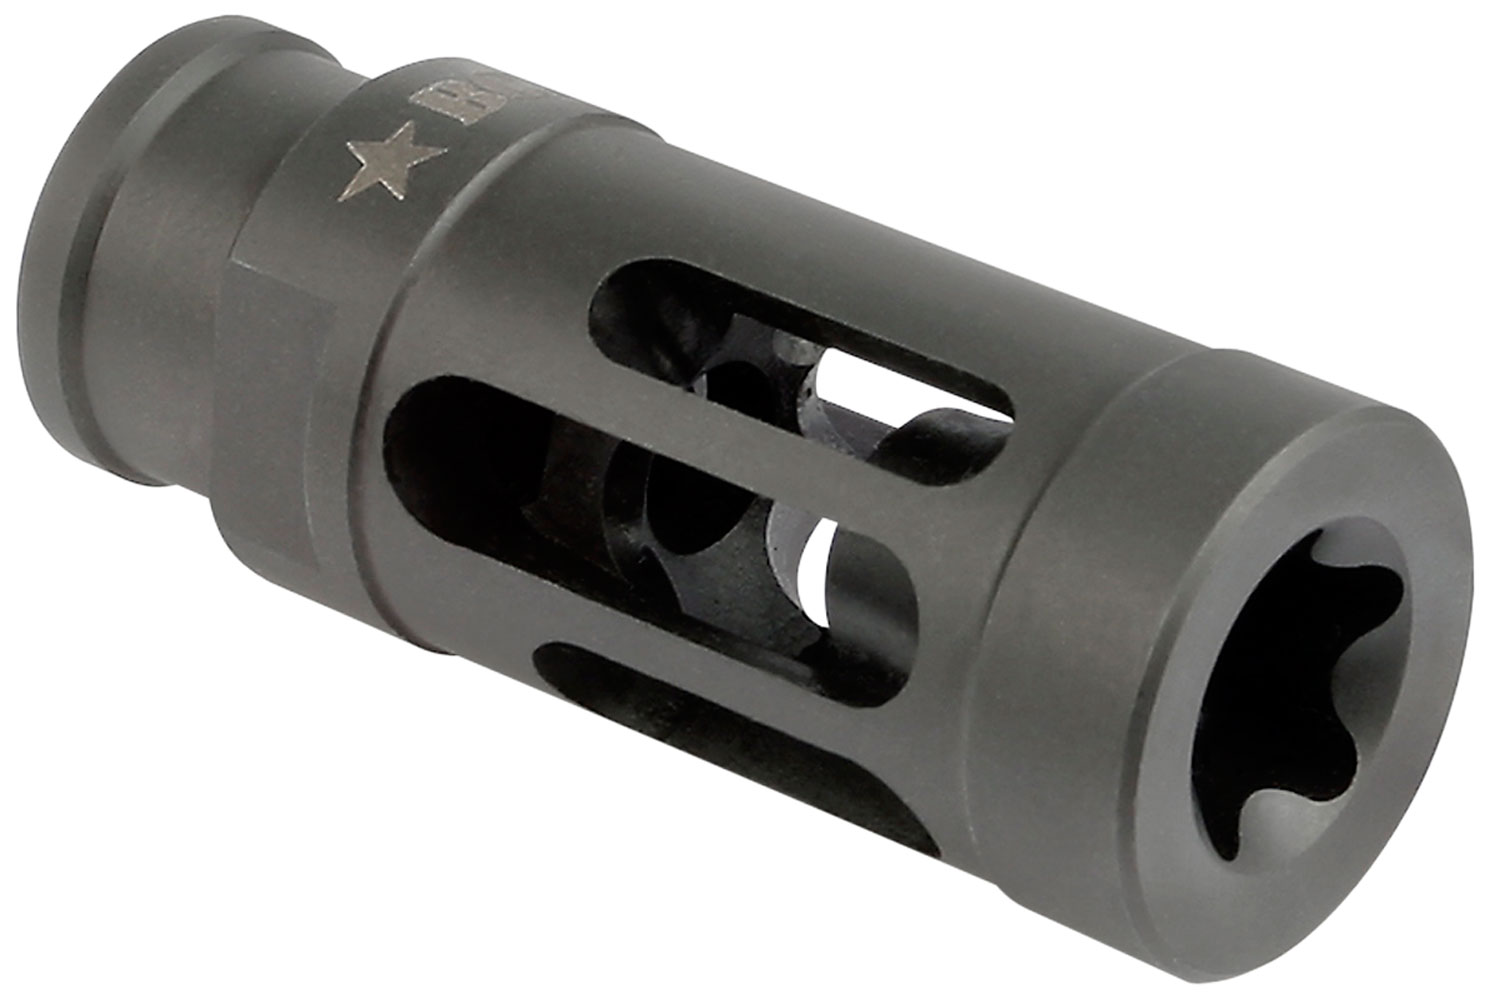 BCM GFCMOD1556 BCMGunfighter Compensator Mod 1 Black Stainless Steel with 1/2